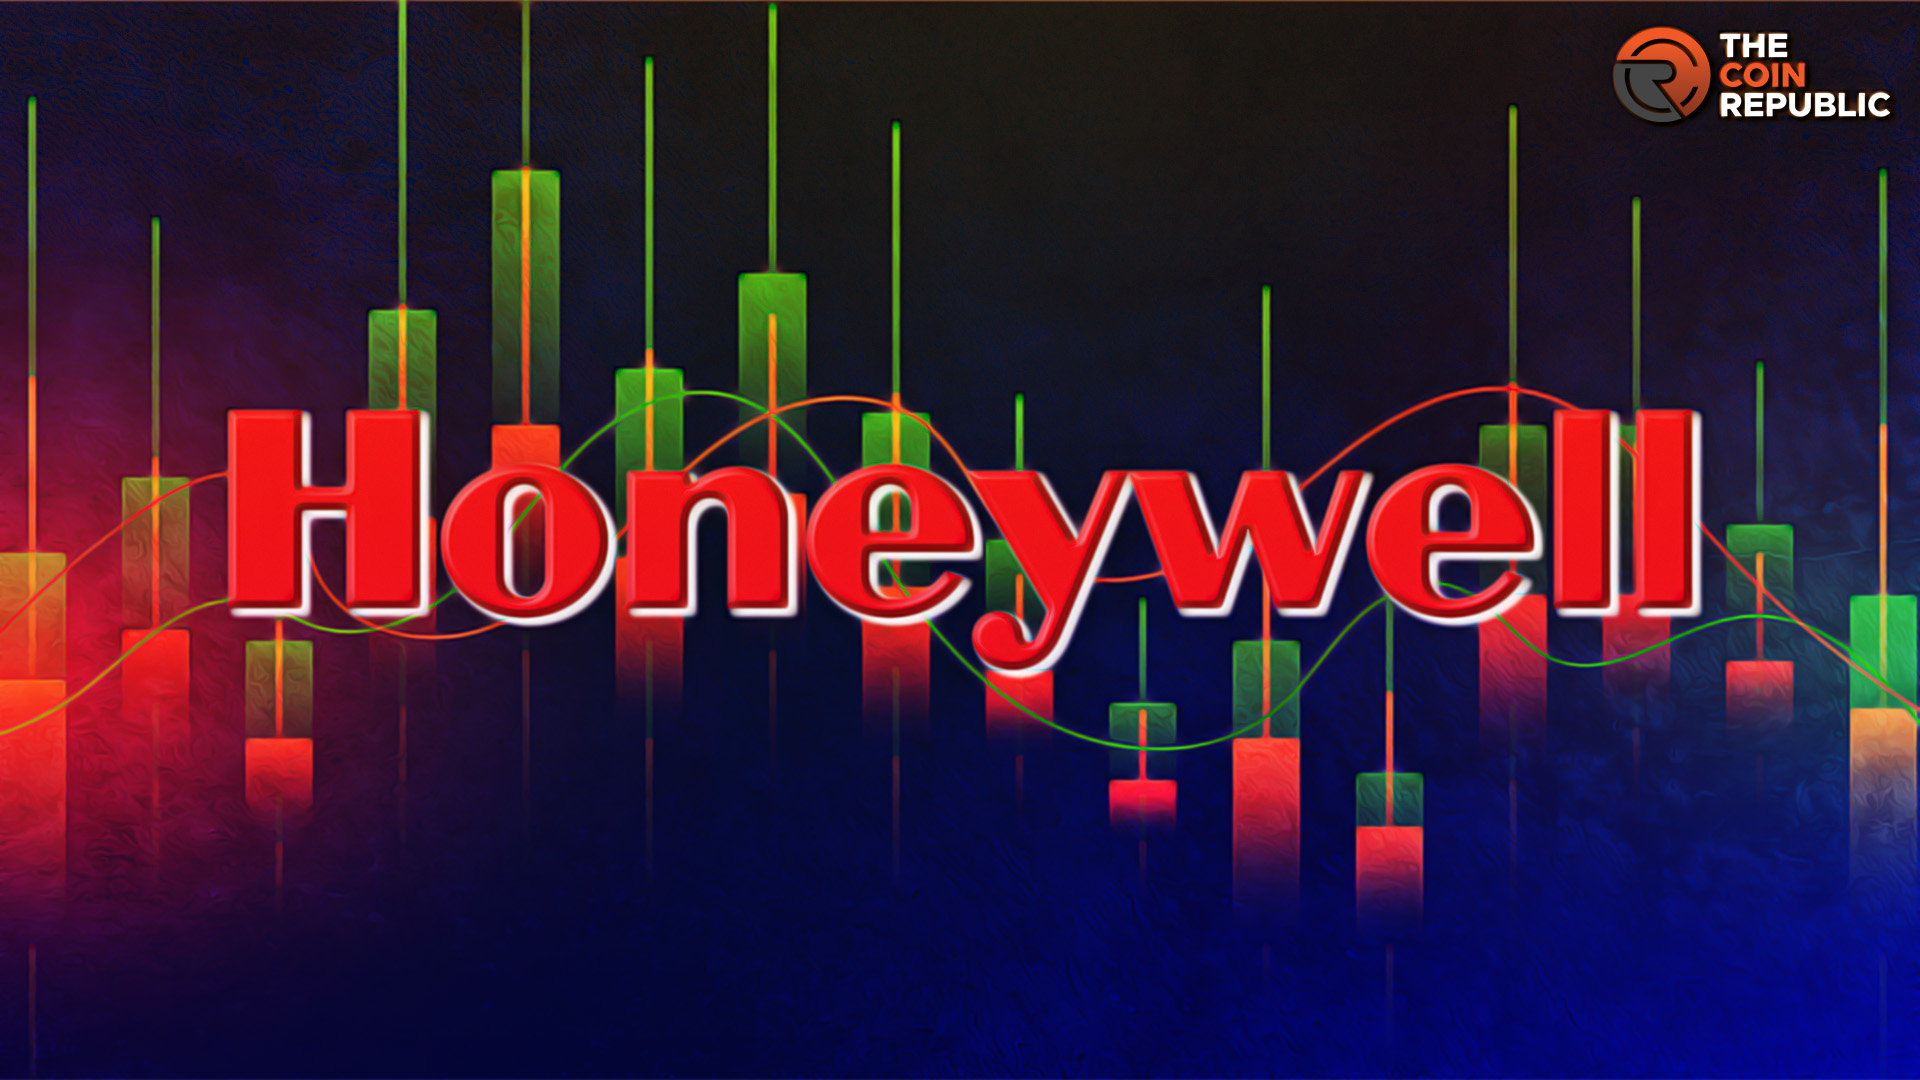 Honeywell (HON) Stock; Price Tanks After Mixed Quarterly Results